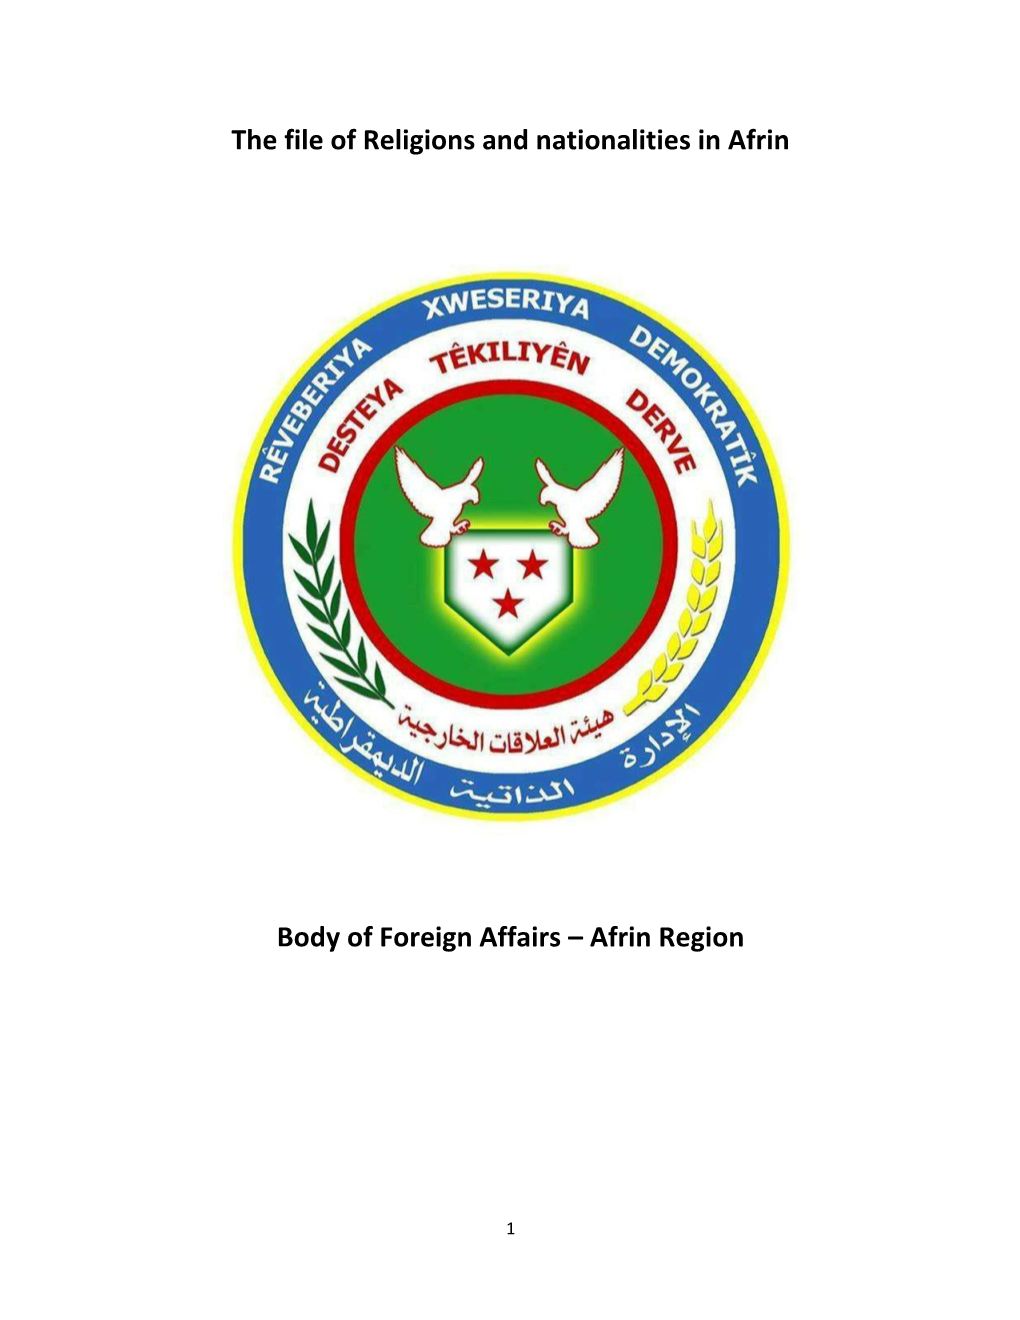 The File of Religions and Nationalities in Afrin Body of Foreign Affairs